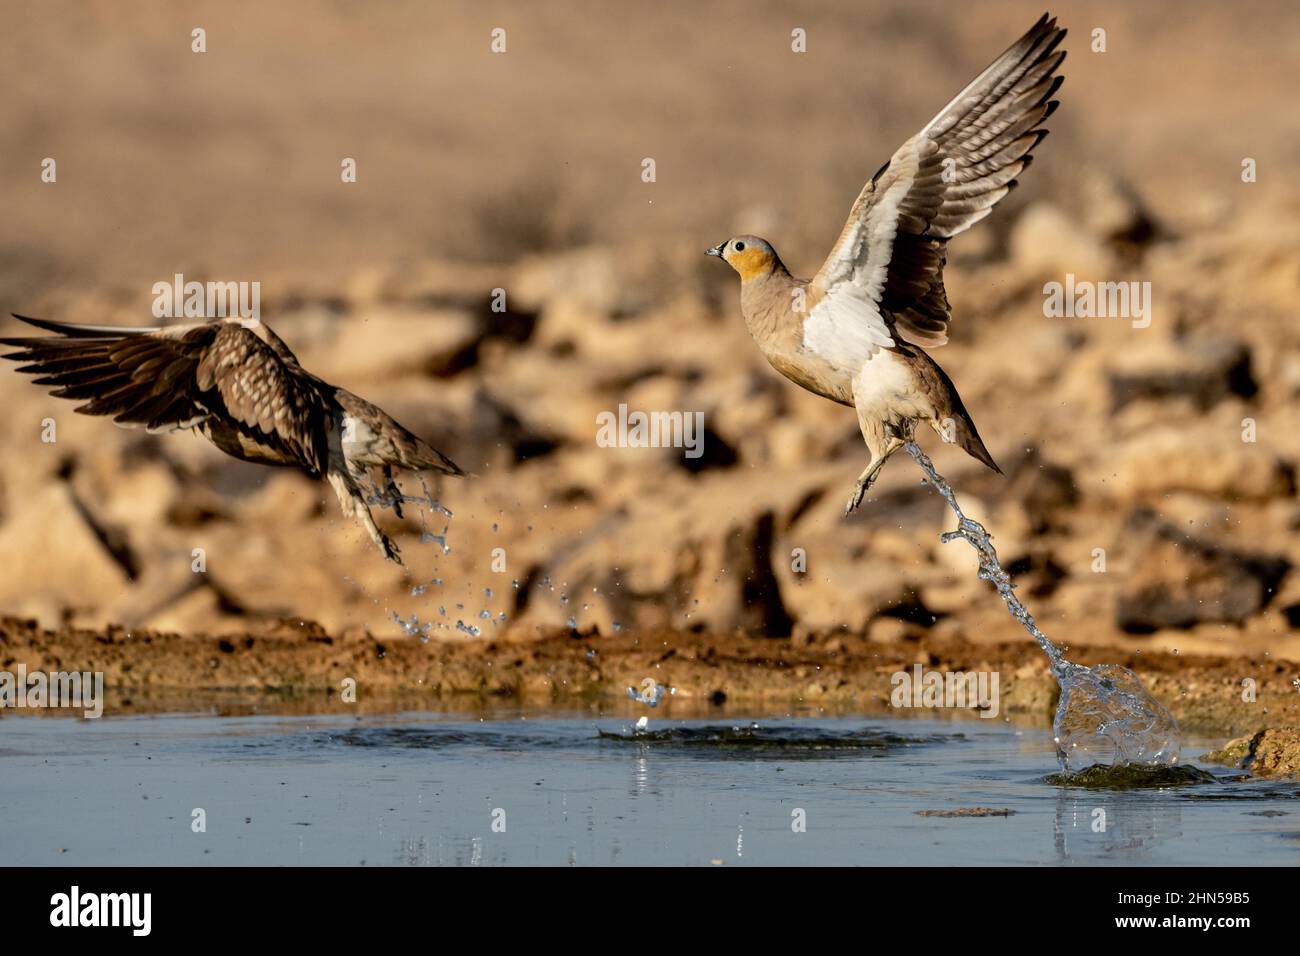 Crowned Sandgrouse (Pterocles coronatus) Near a water pool Photographed in the Negev Desert, israel in November Stock Photo